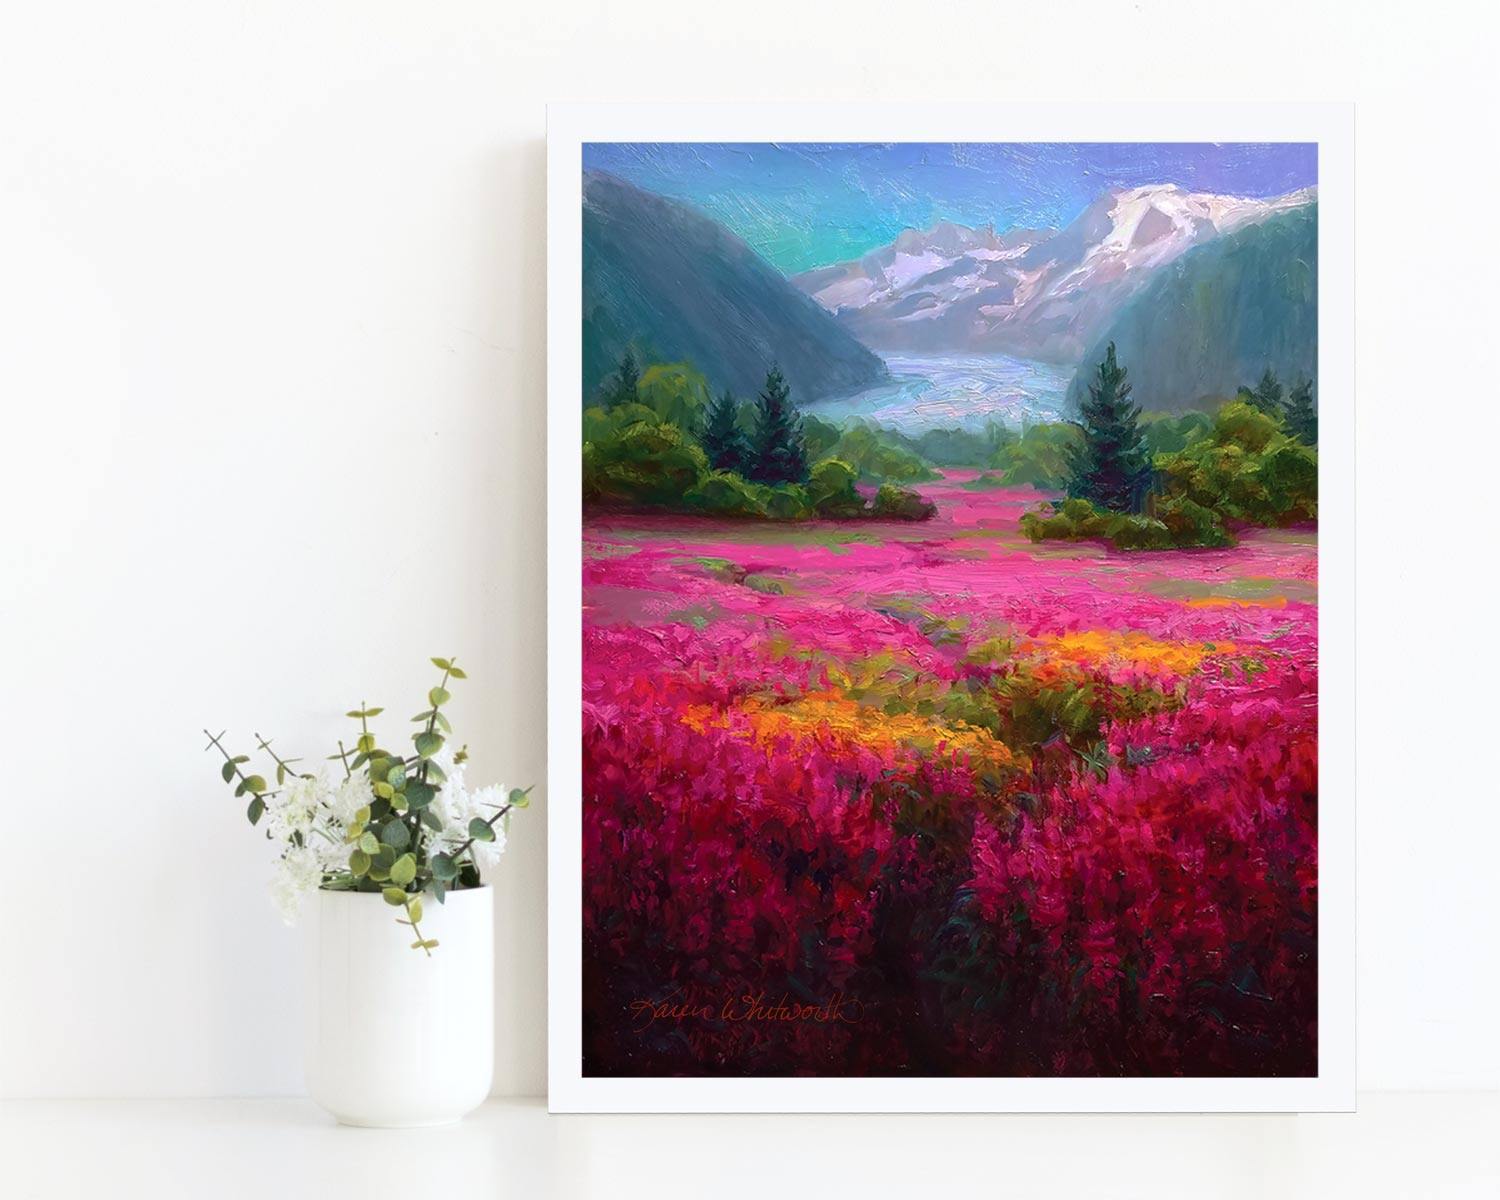 Alaska scenery wall art print of Mendenhall Glacier and fireweed flowers. Painting by landscape artist Karen Whitworth